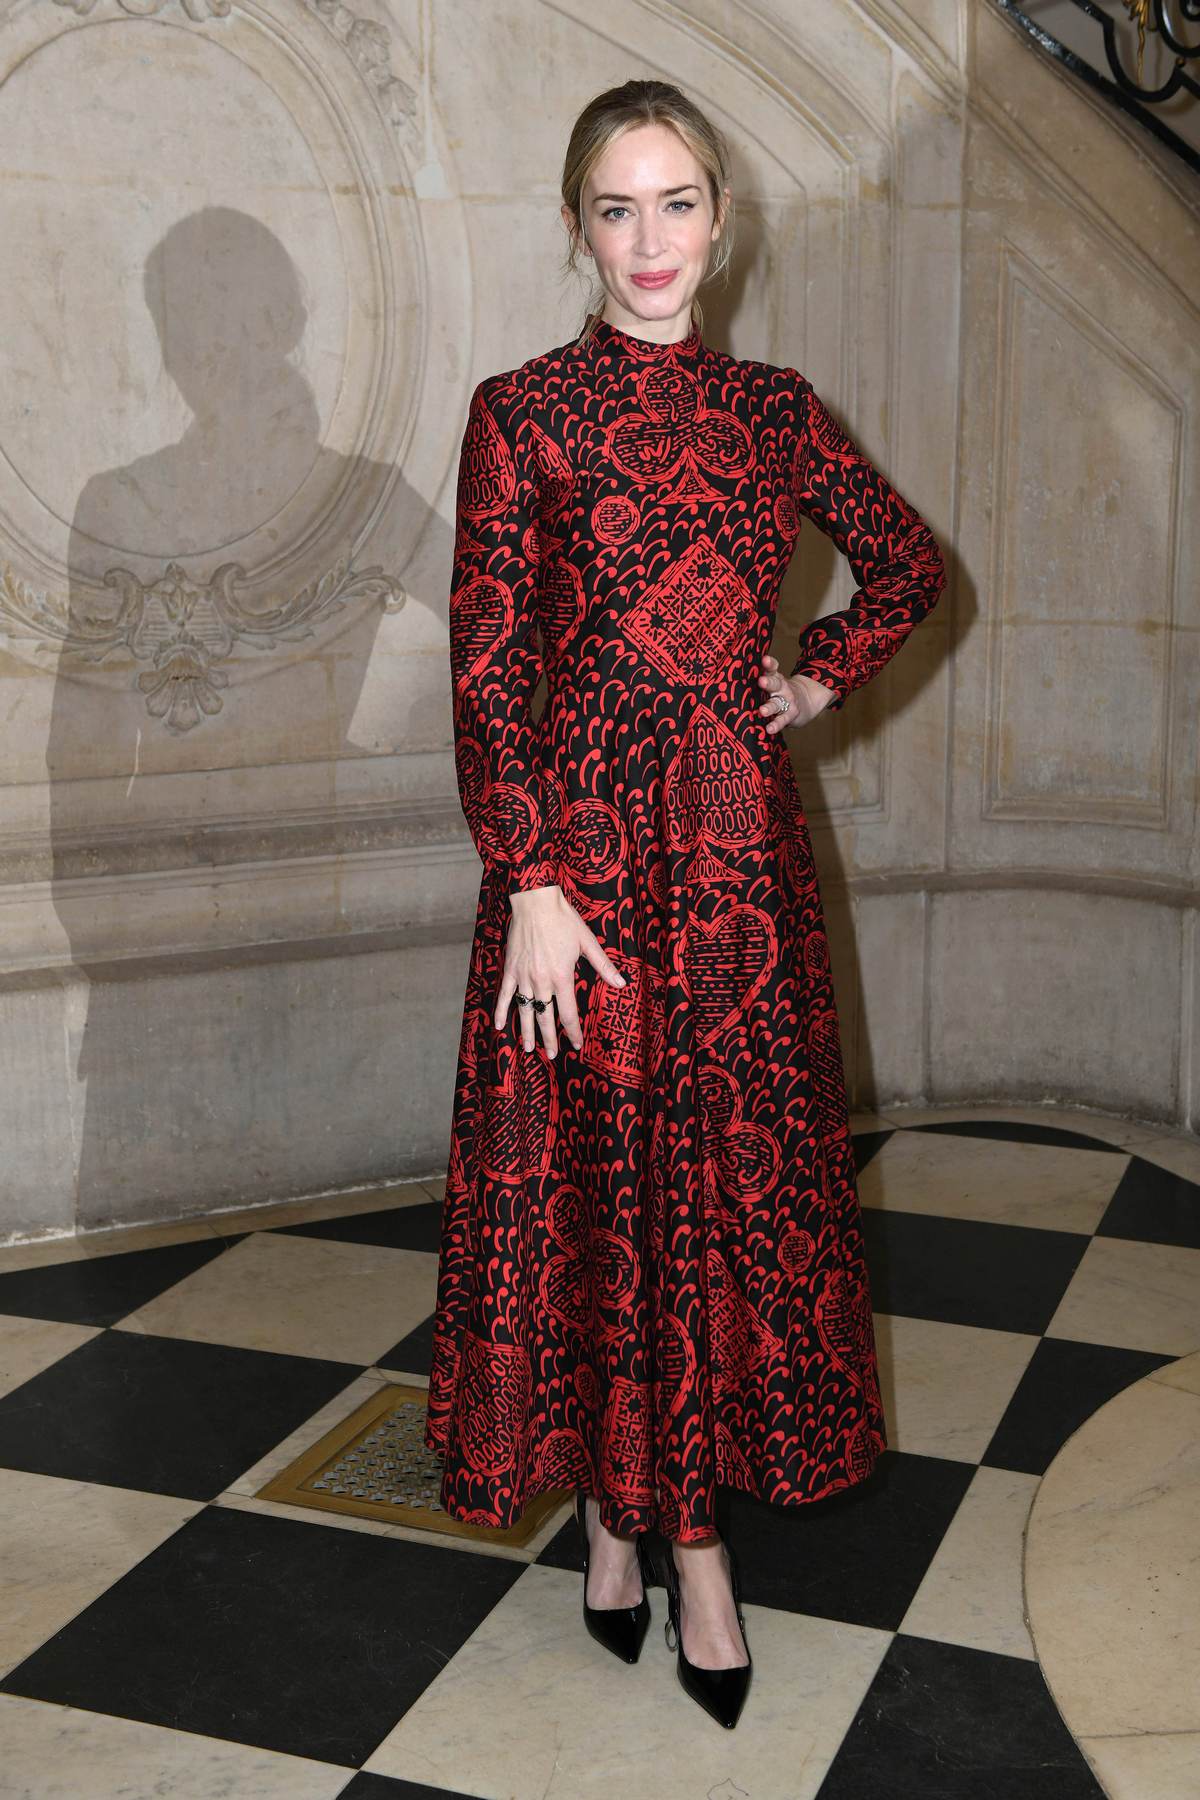 Emily_Blunt_-_PFW_Christian_Dior_SS_2018_show_in_Paris2C_France_on_January_22-01.jpg